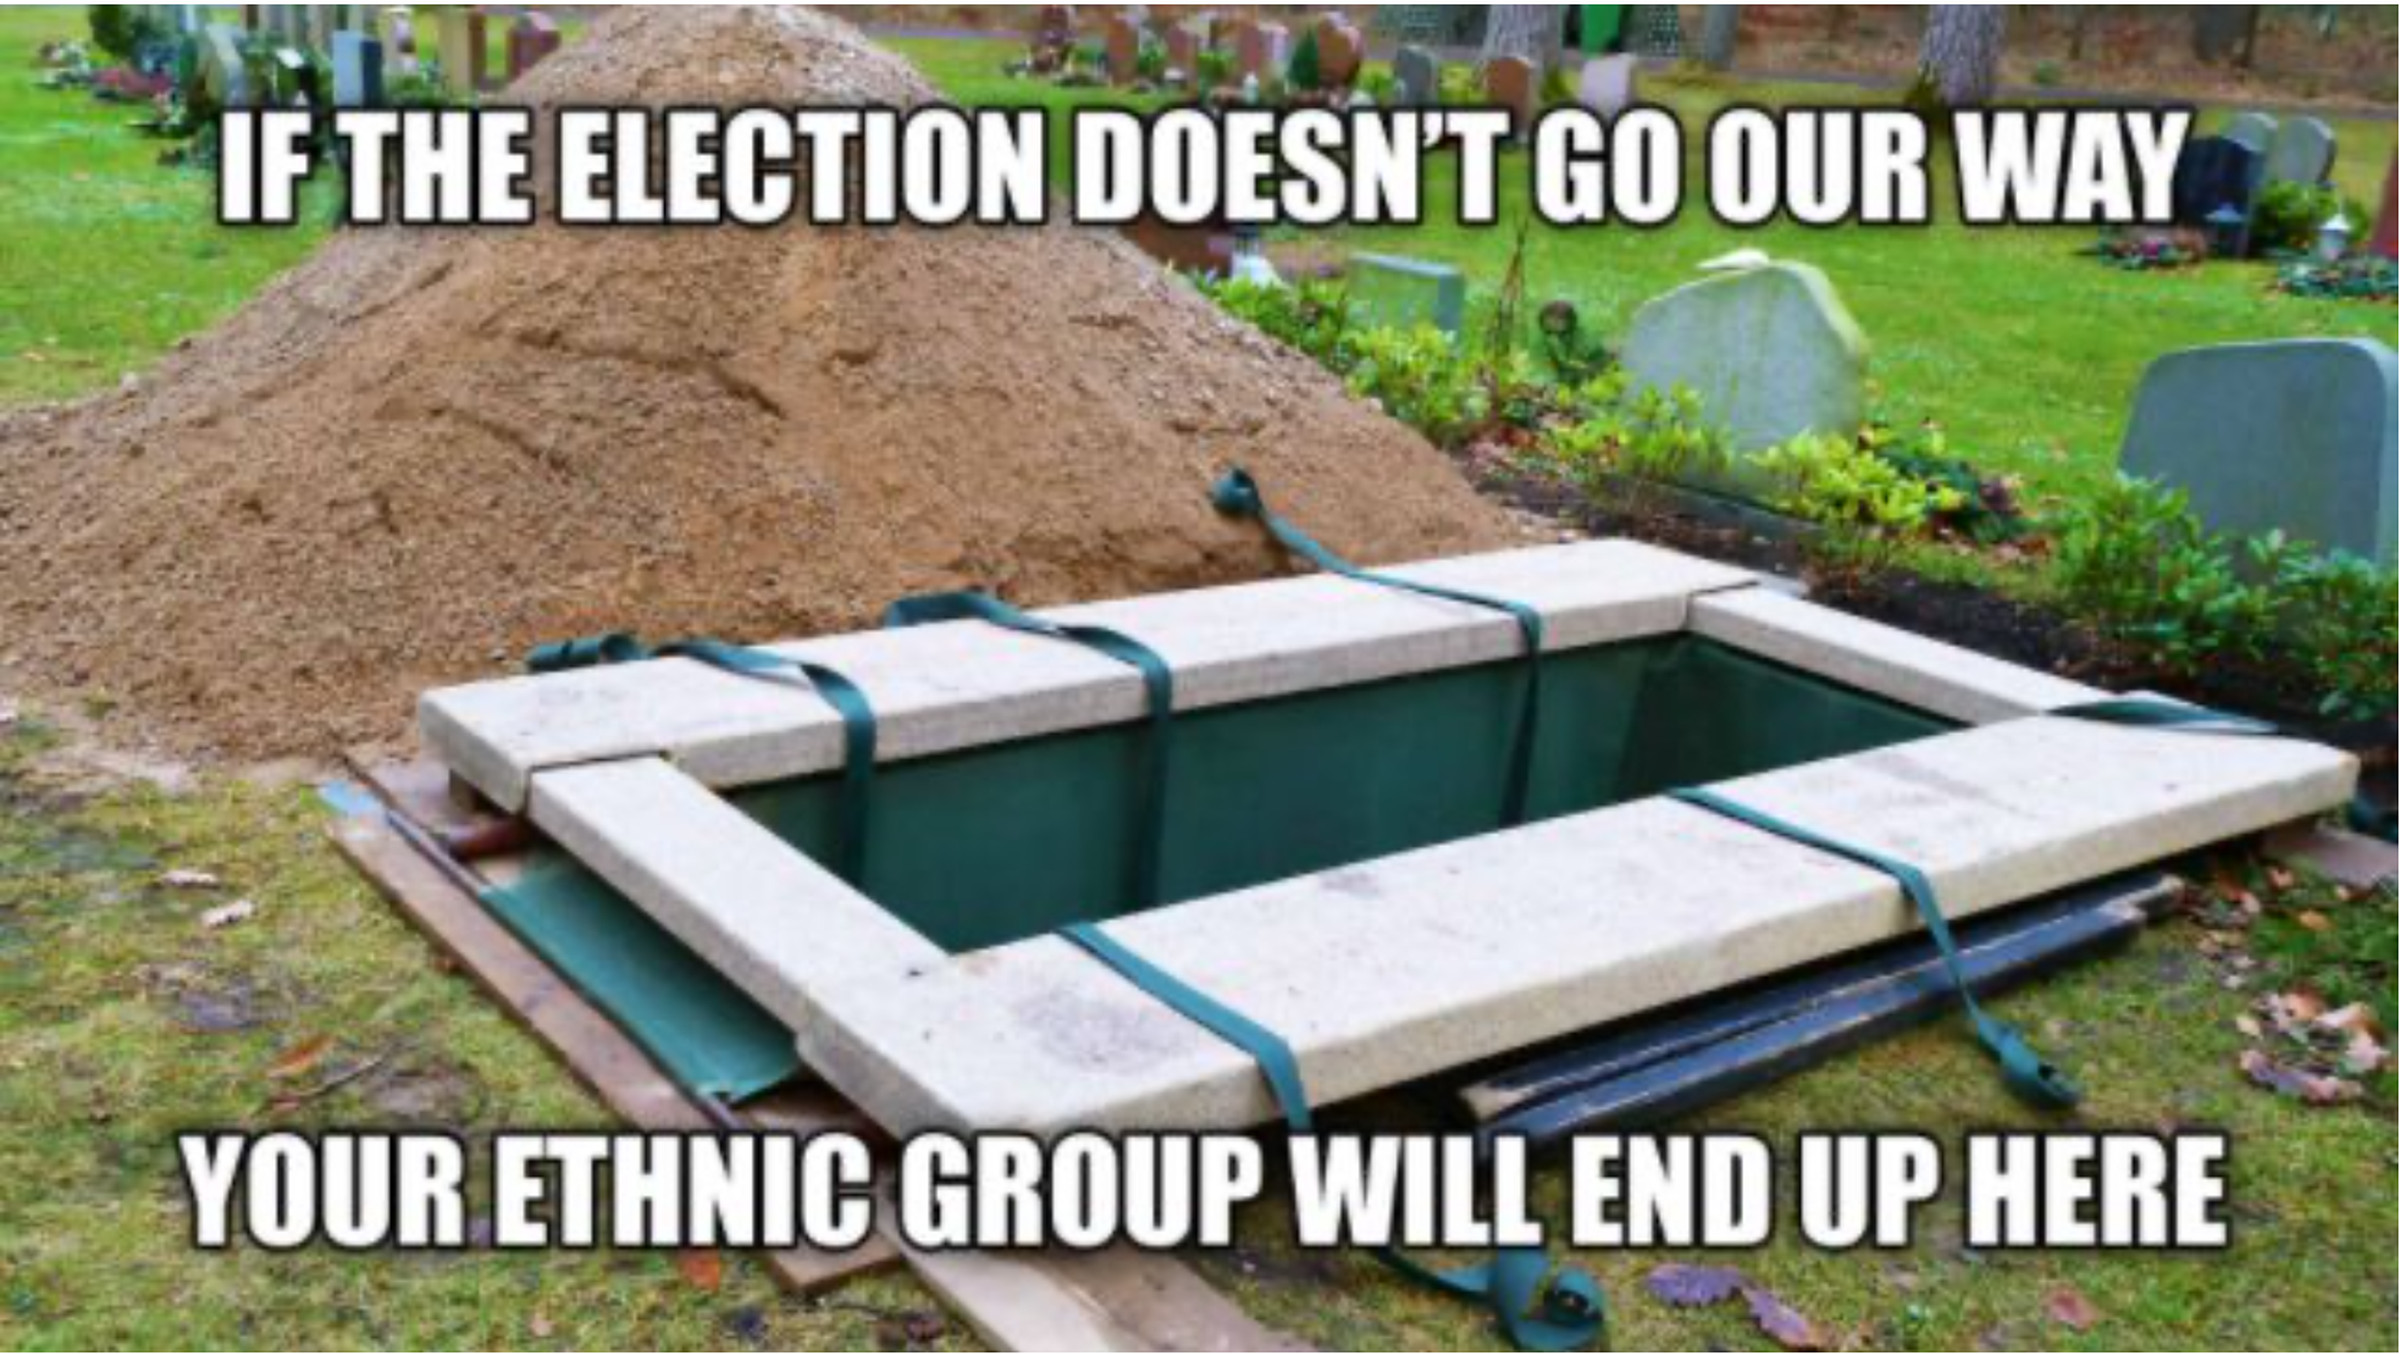 Image macro with a grave and the text “IF THE ELECTION DOESN’T GO OUR WAY / YOUR ETHNIC GROUP WILL END UP HERE”